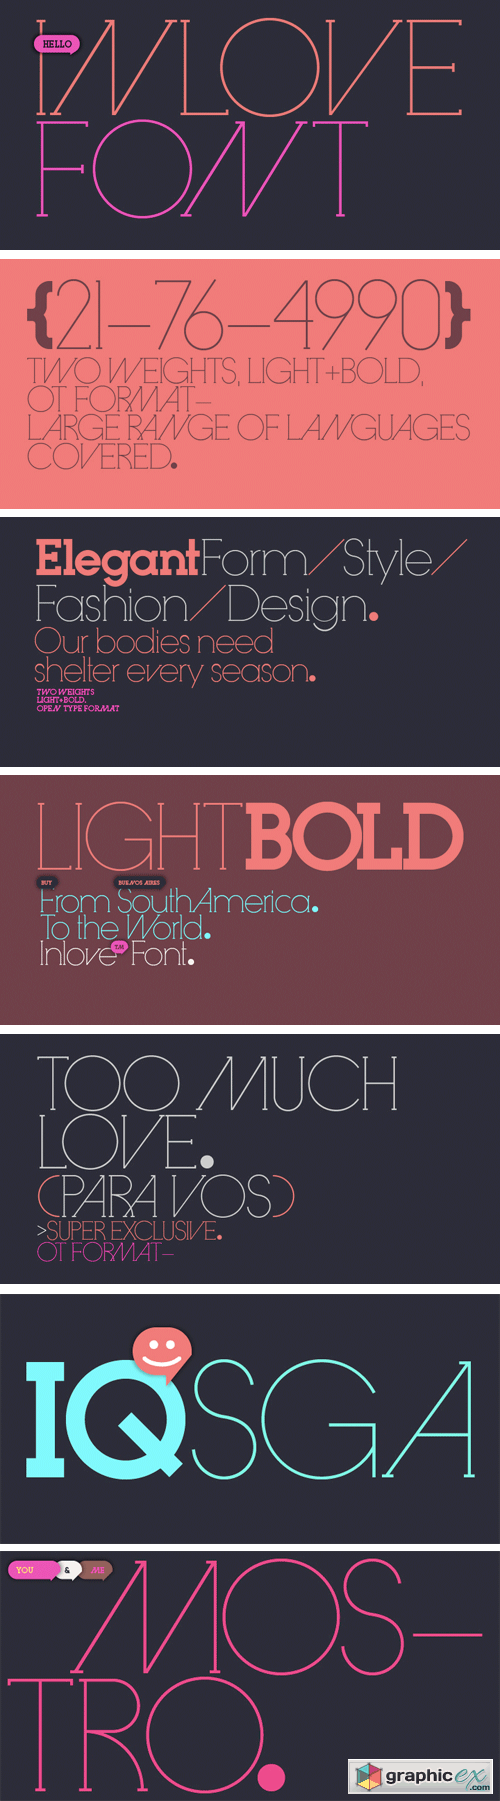 Inlove Font Family - 2 Fonts for $49